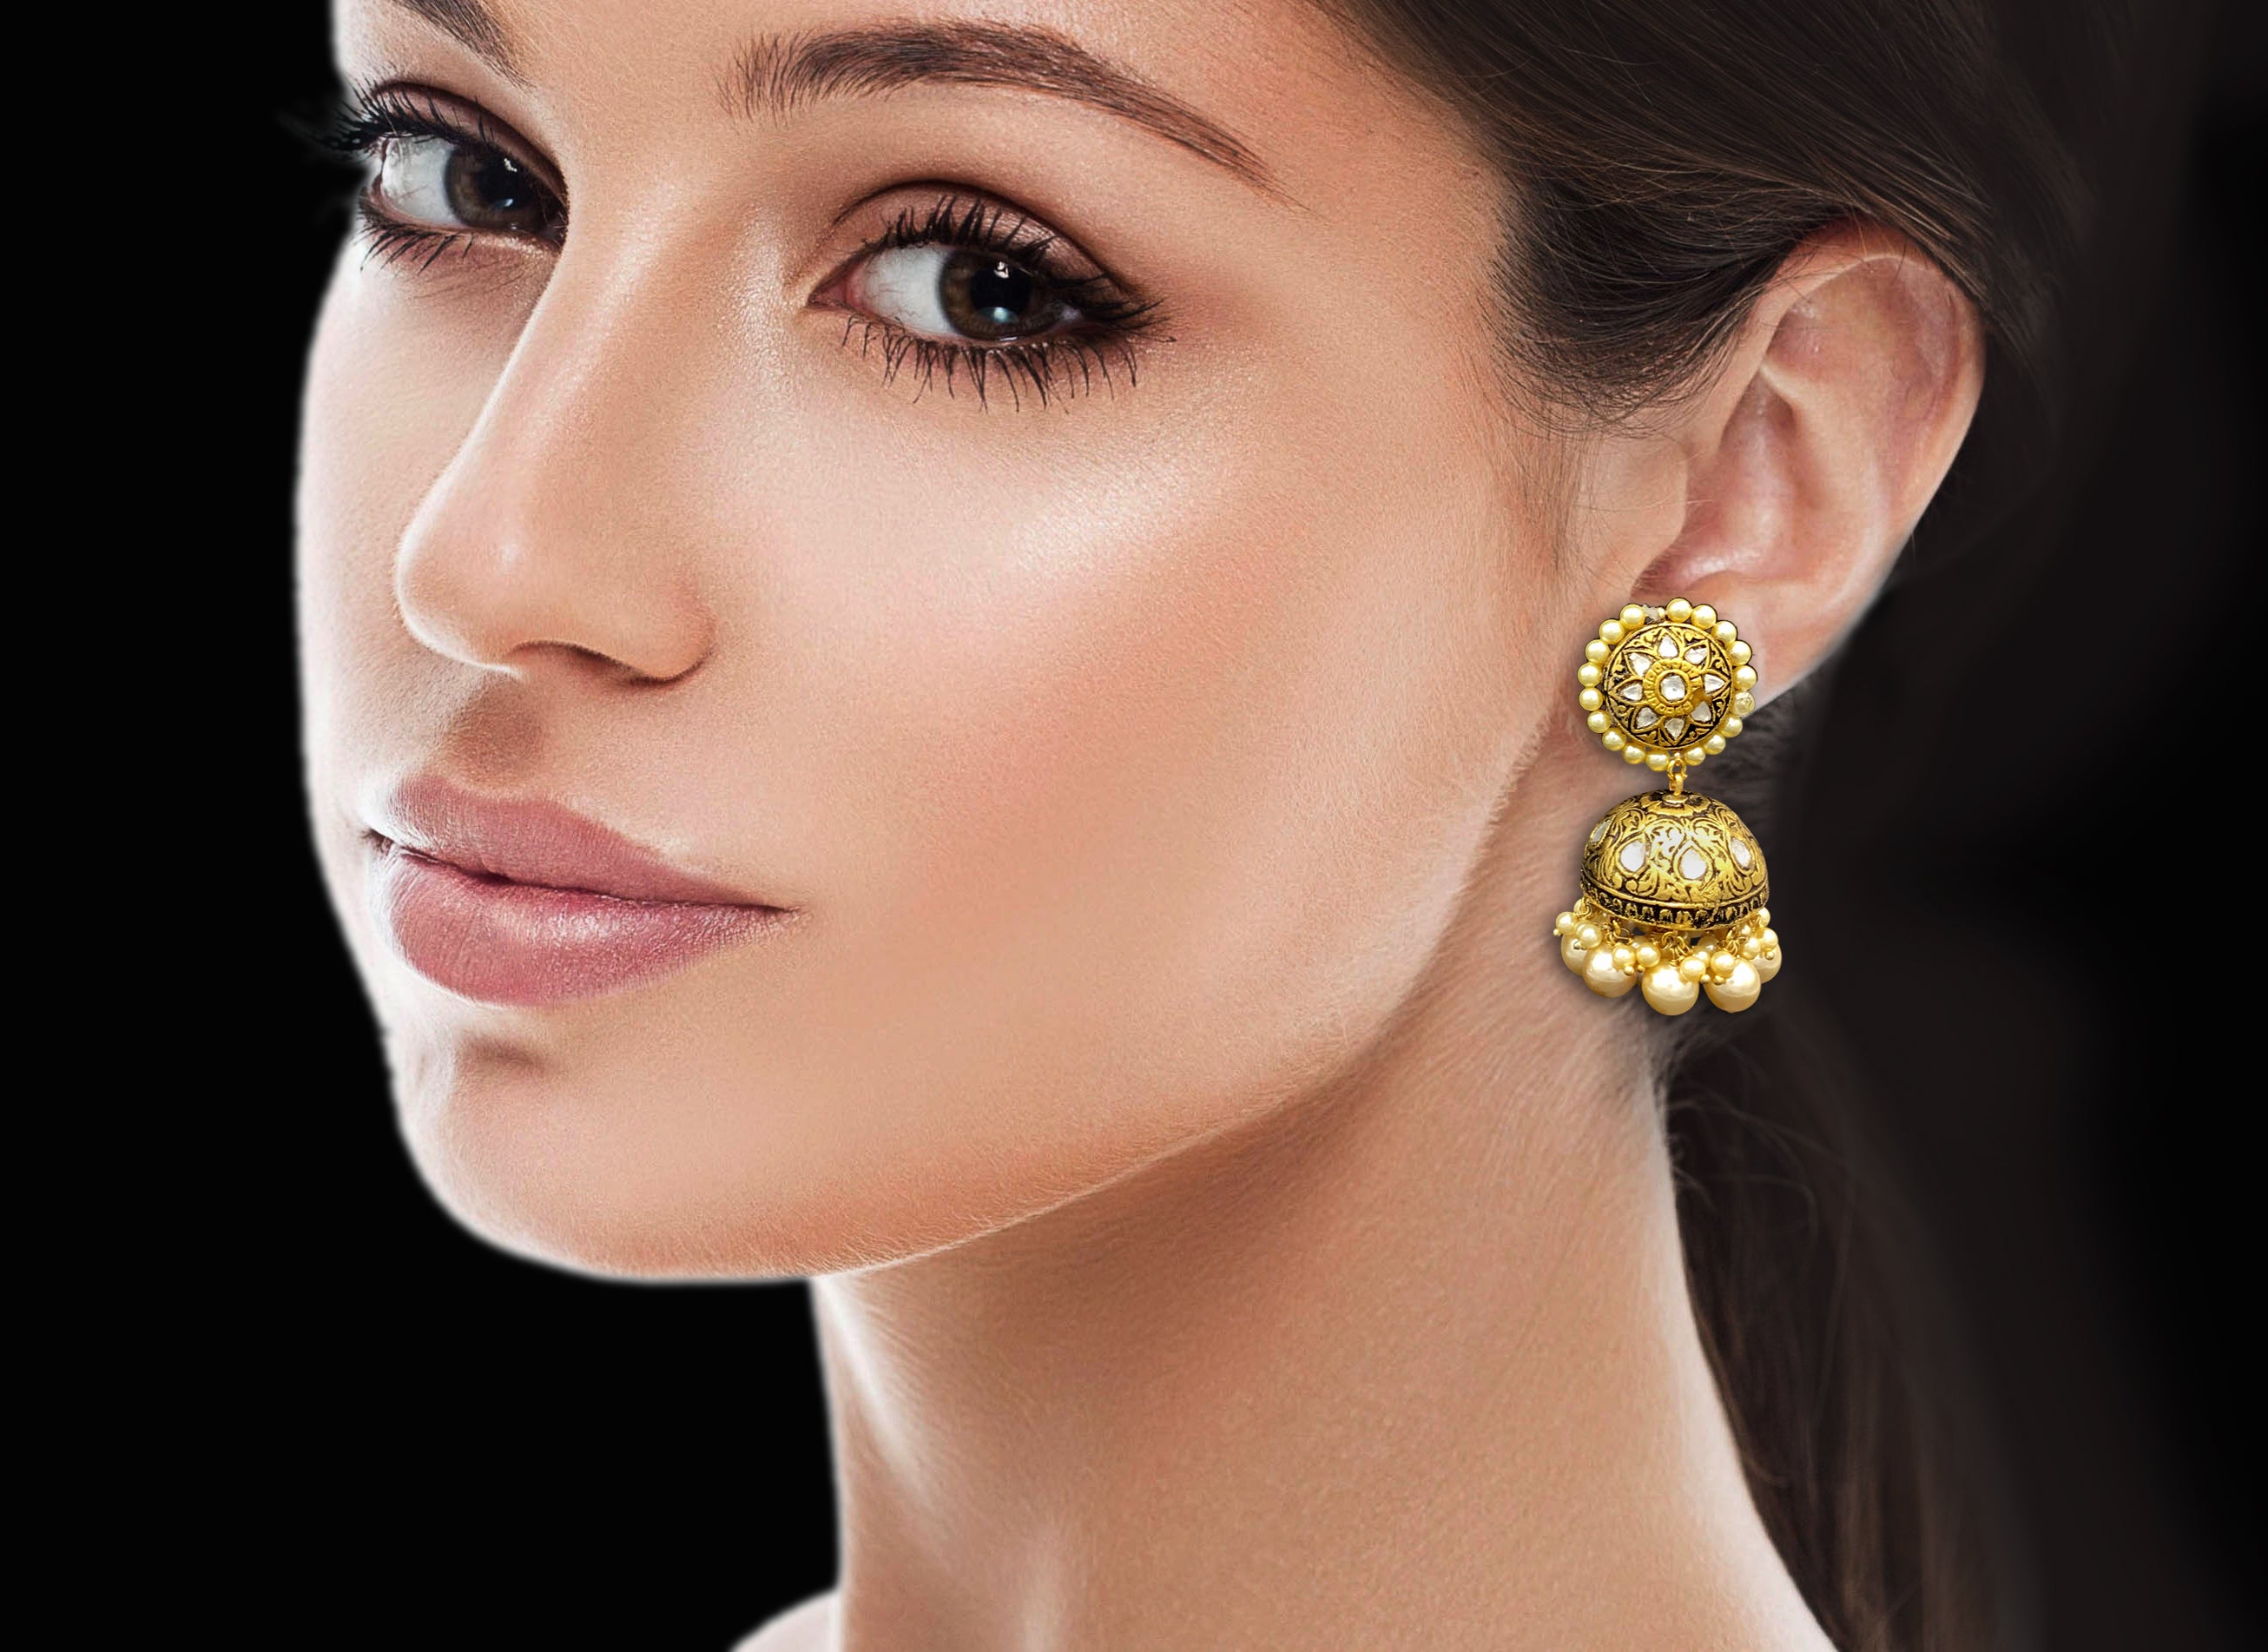 23k Gold and Diamond Polki Antique Tops and Jhumki Earring Pair with intricate goldwork - G. K. Ratnam